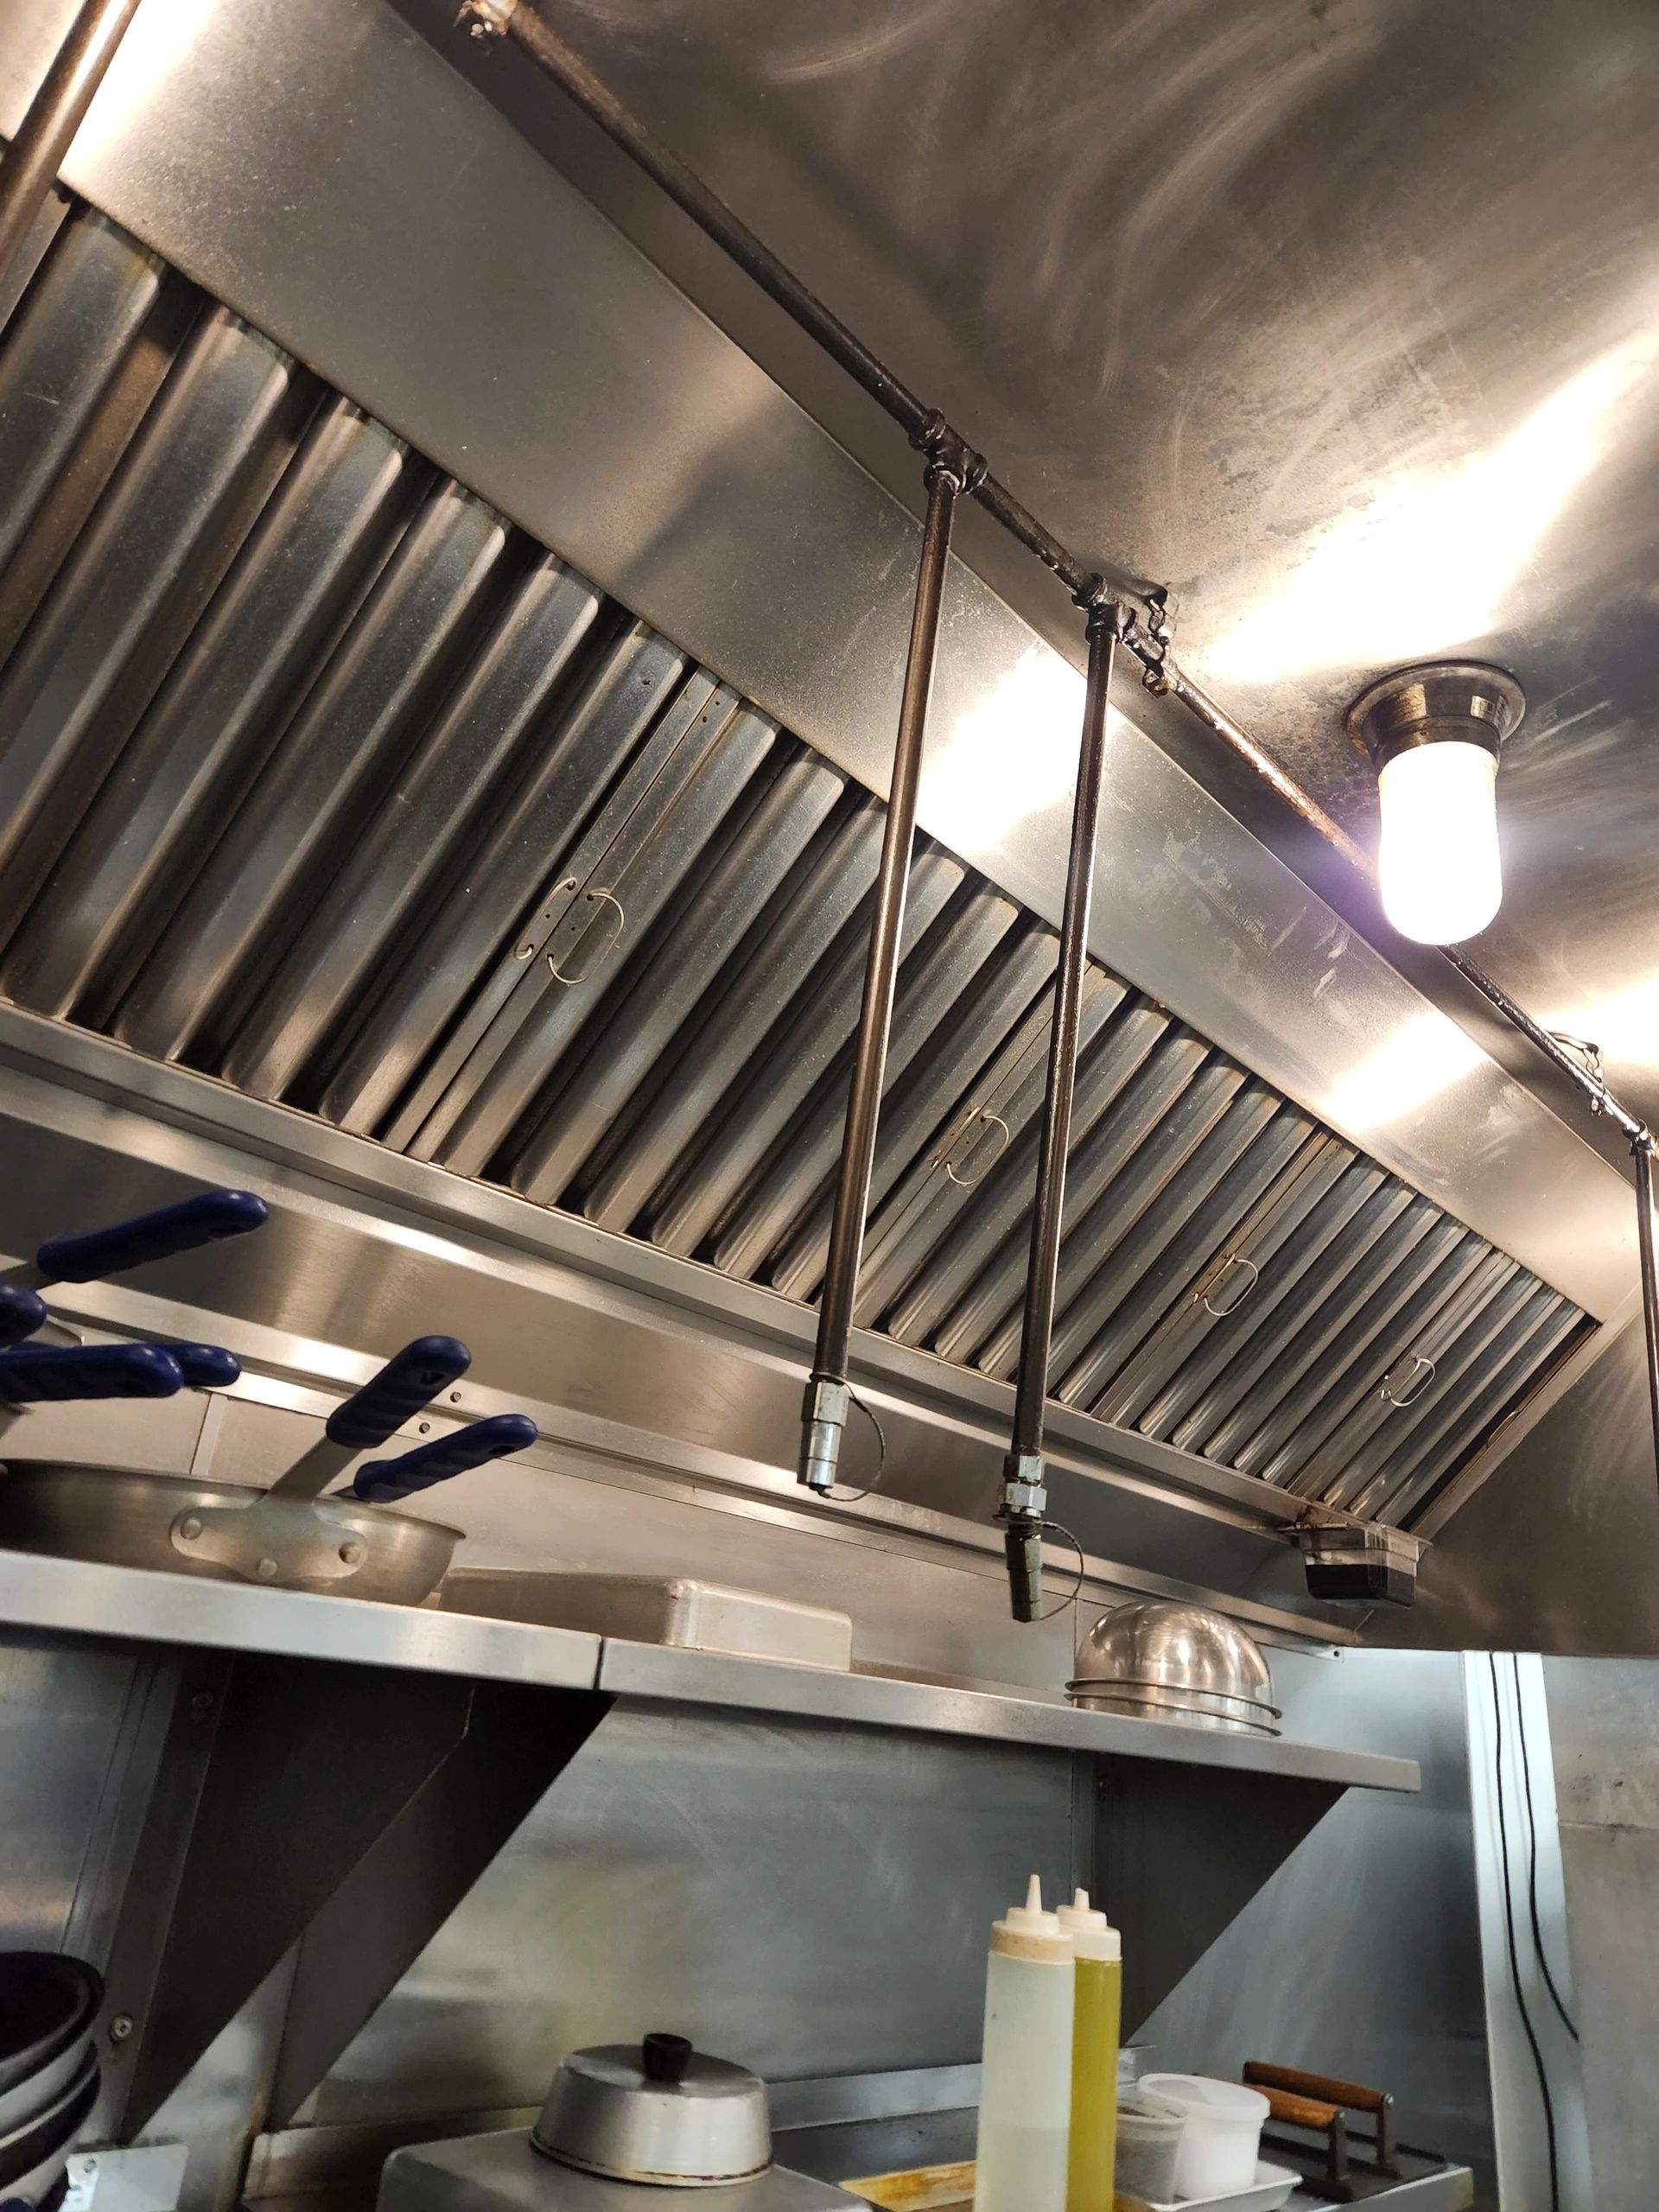 Kitchen Exhaust Hood Cleaning - A-1 Cleaning Service, LLC.